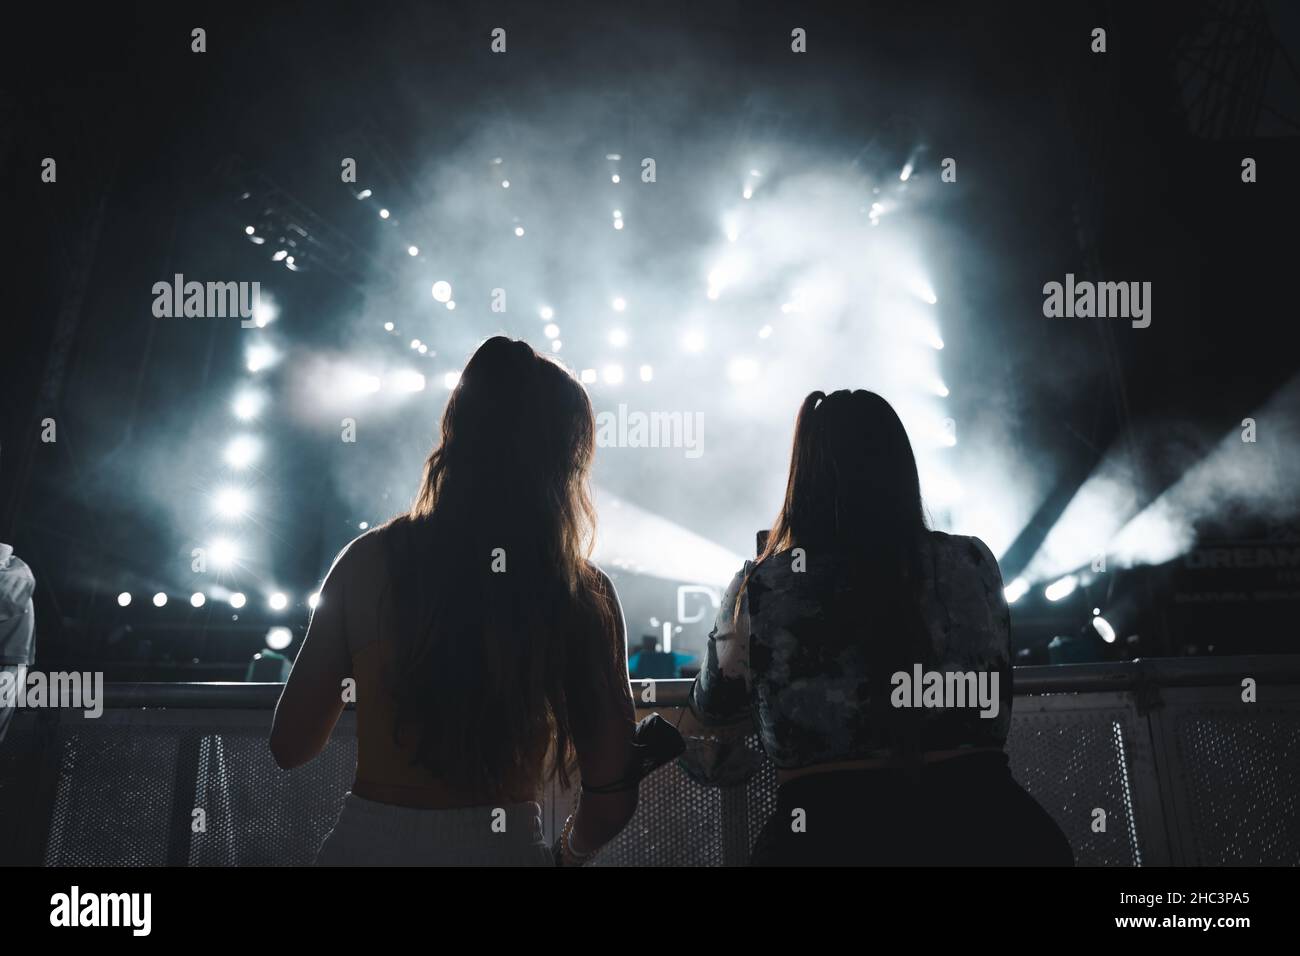 Back view of two women enjoying the concert and taking photos with a phone Stock Photo